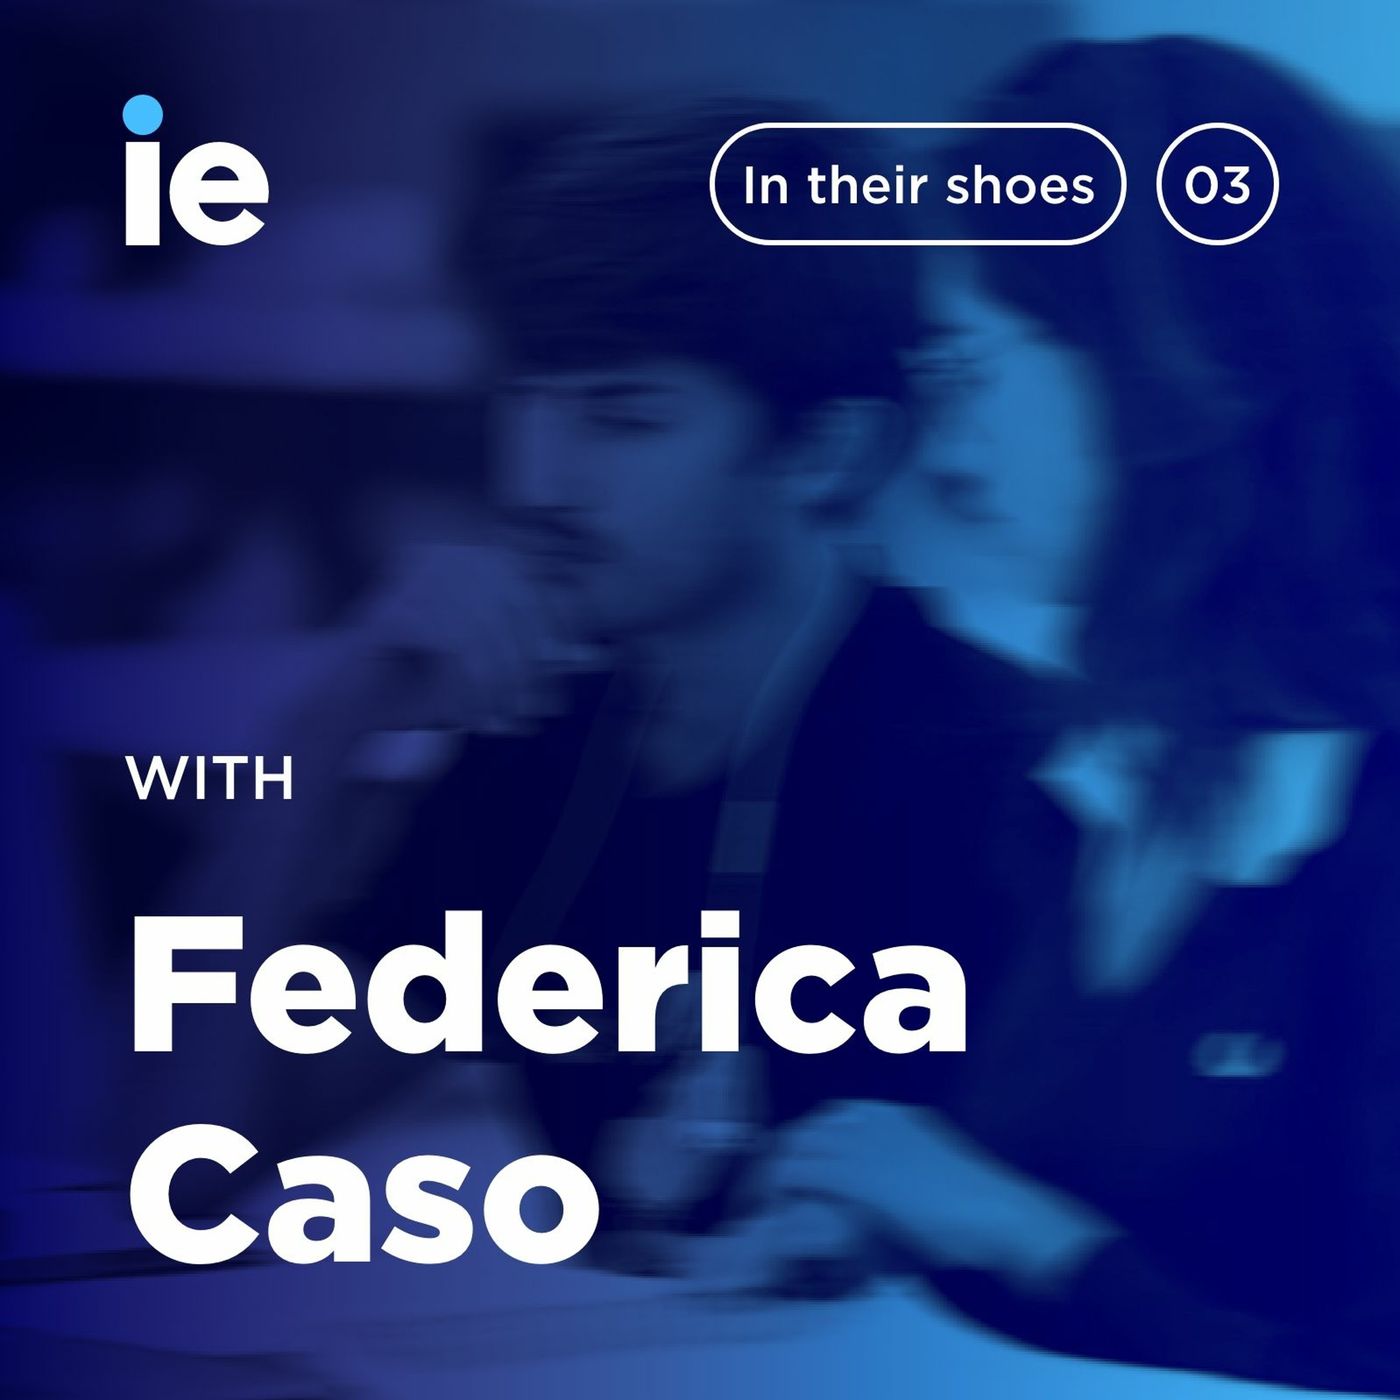 IE University: In Their Shoes - Federica Caso